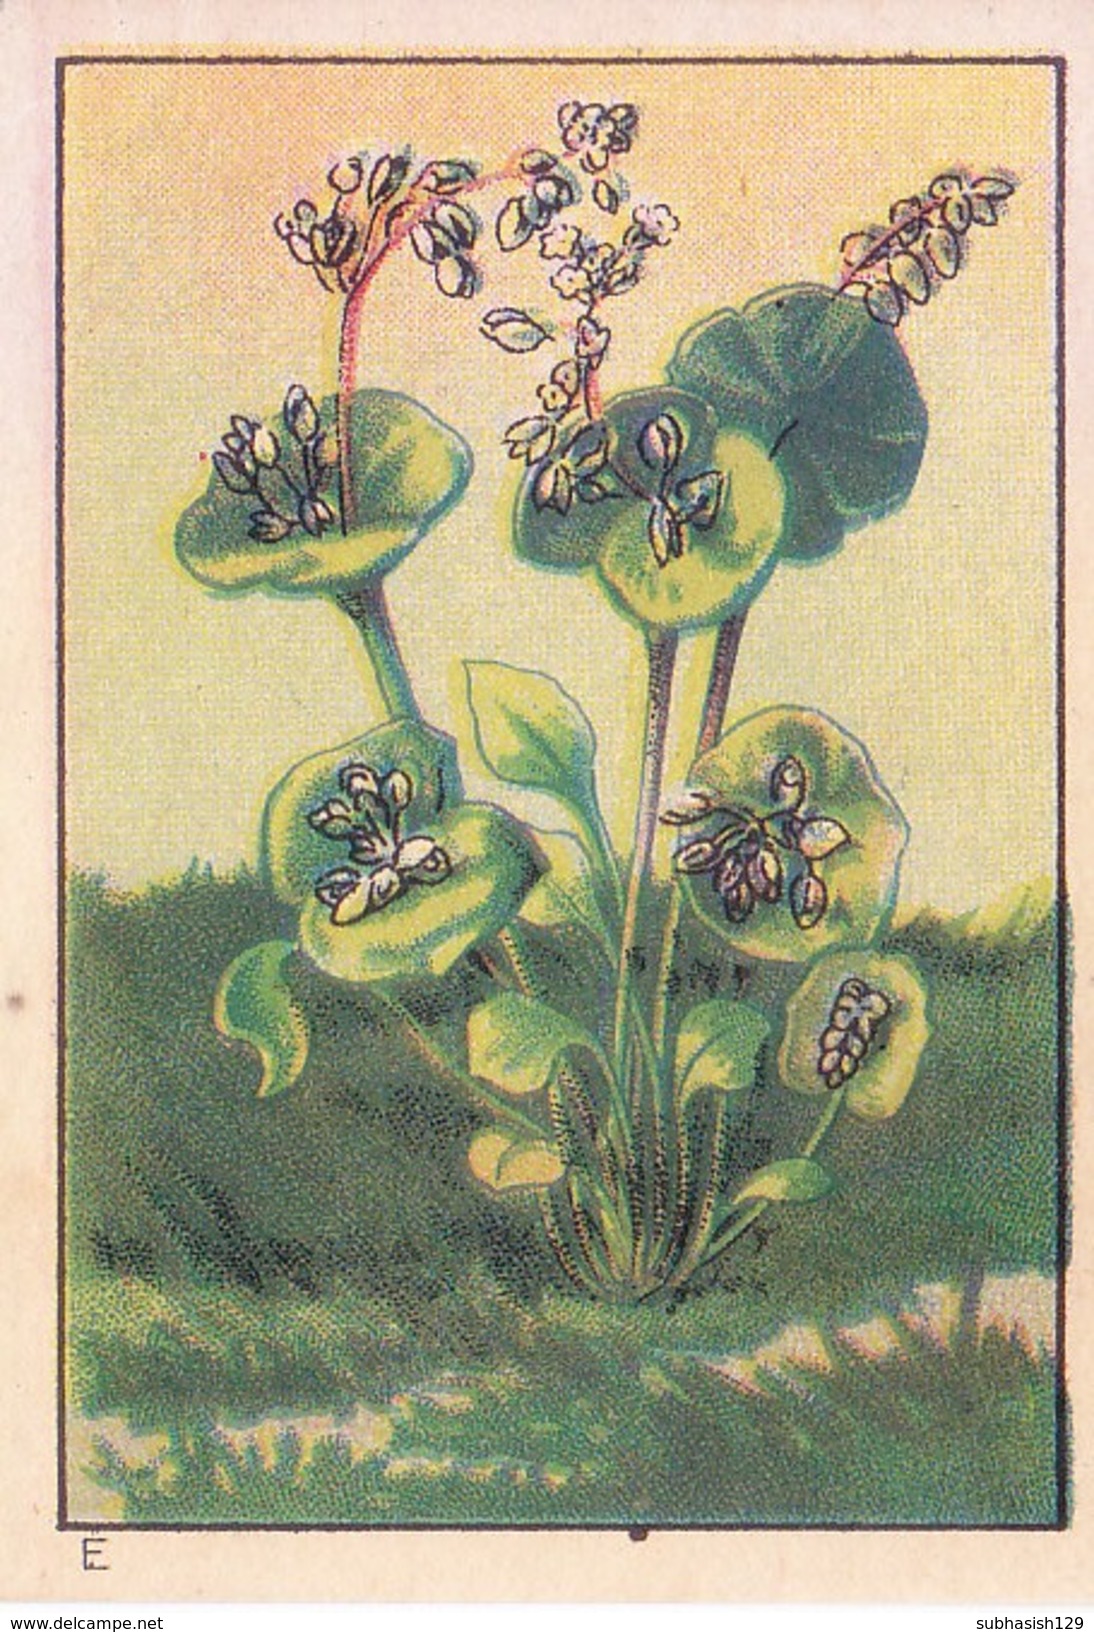 SWITZERLAND - NESTLE 'S PICTURE STAMP / CARD / LABEL - WONDERS OF THE WORLD - PLANT WITH FLOWER - Advertising